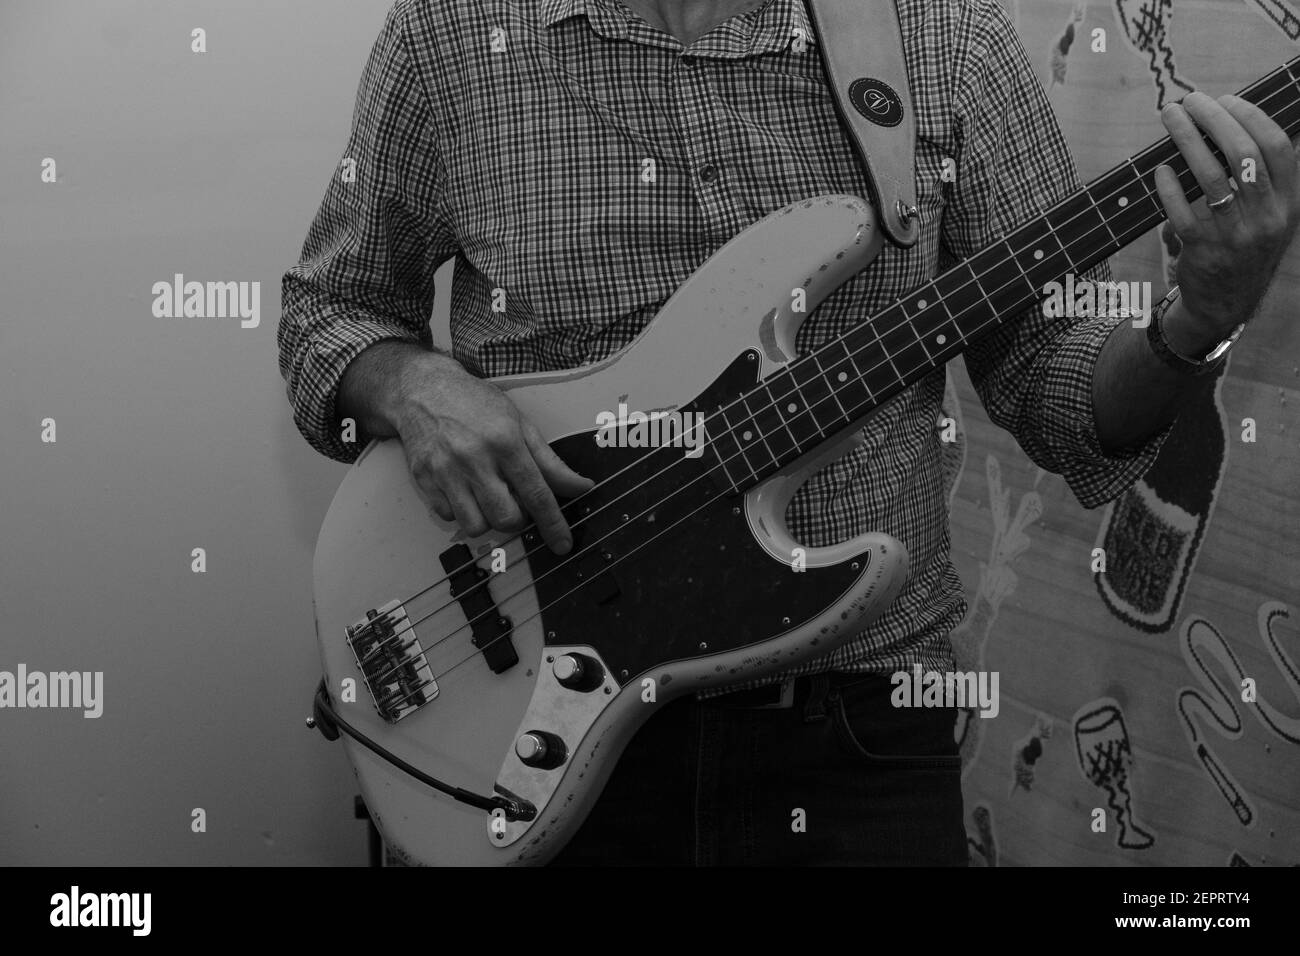 A man playing a Fender Jazz bass guitar in a music rehearsal room Stock Photo